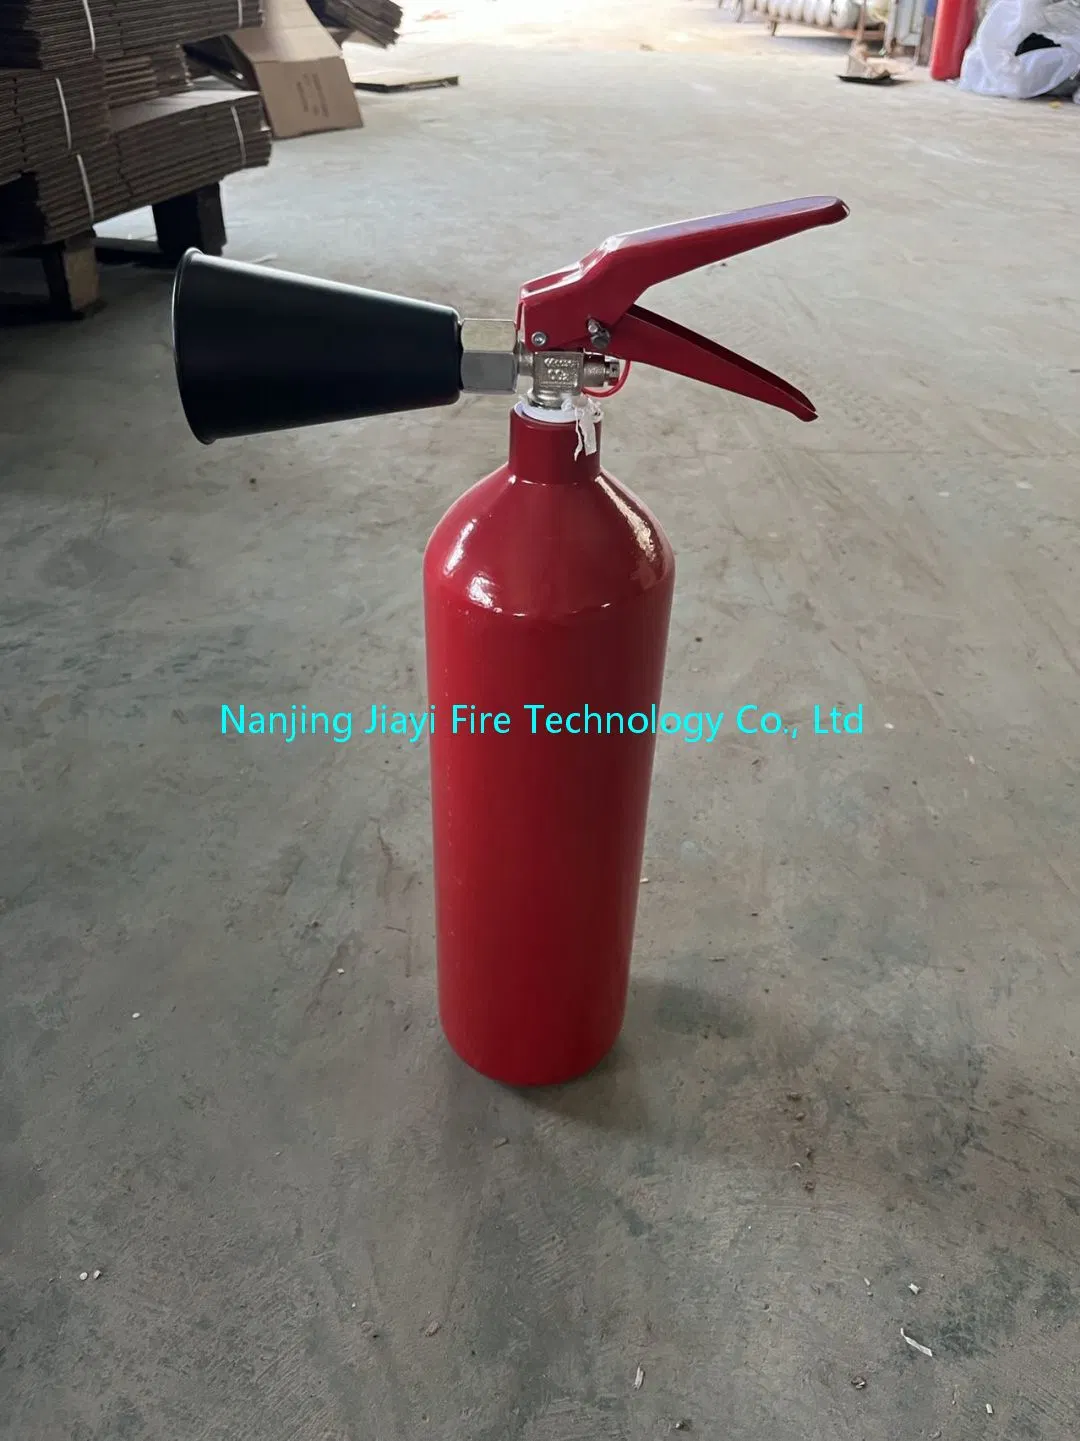 ODM Factory Sales Excellent Jiayi Valve Sprinkler Home Extinguisher Fire Control CO2 Co